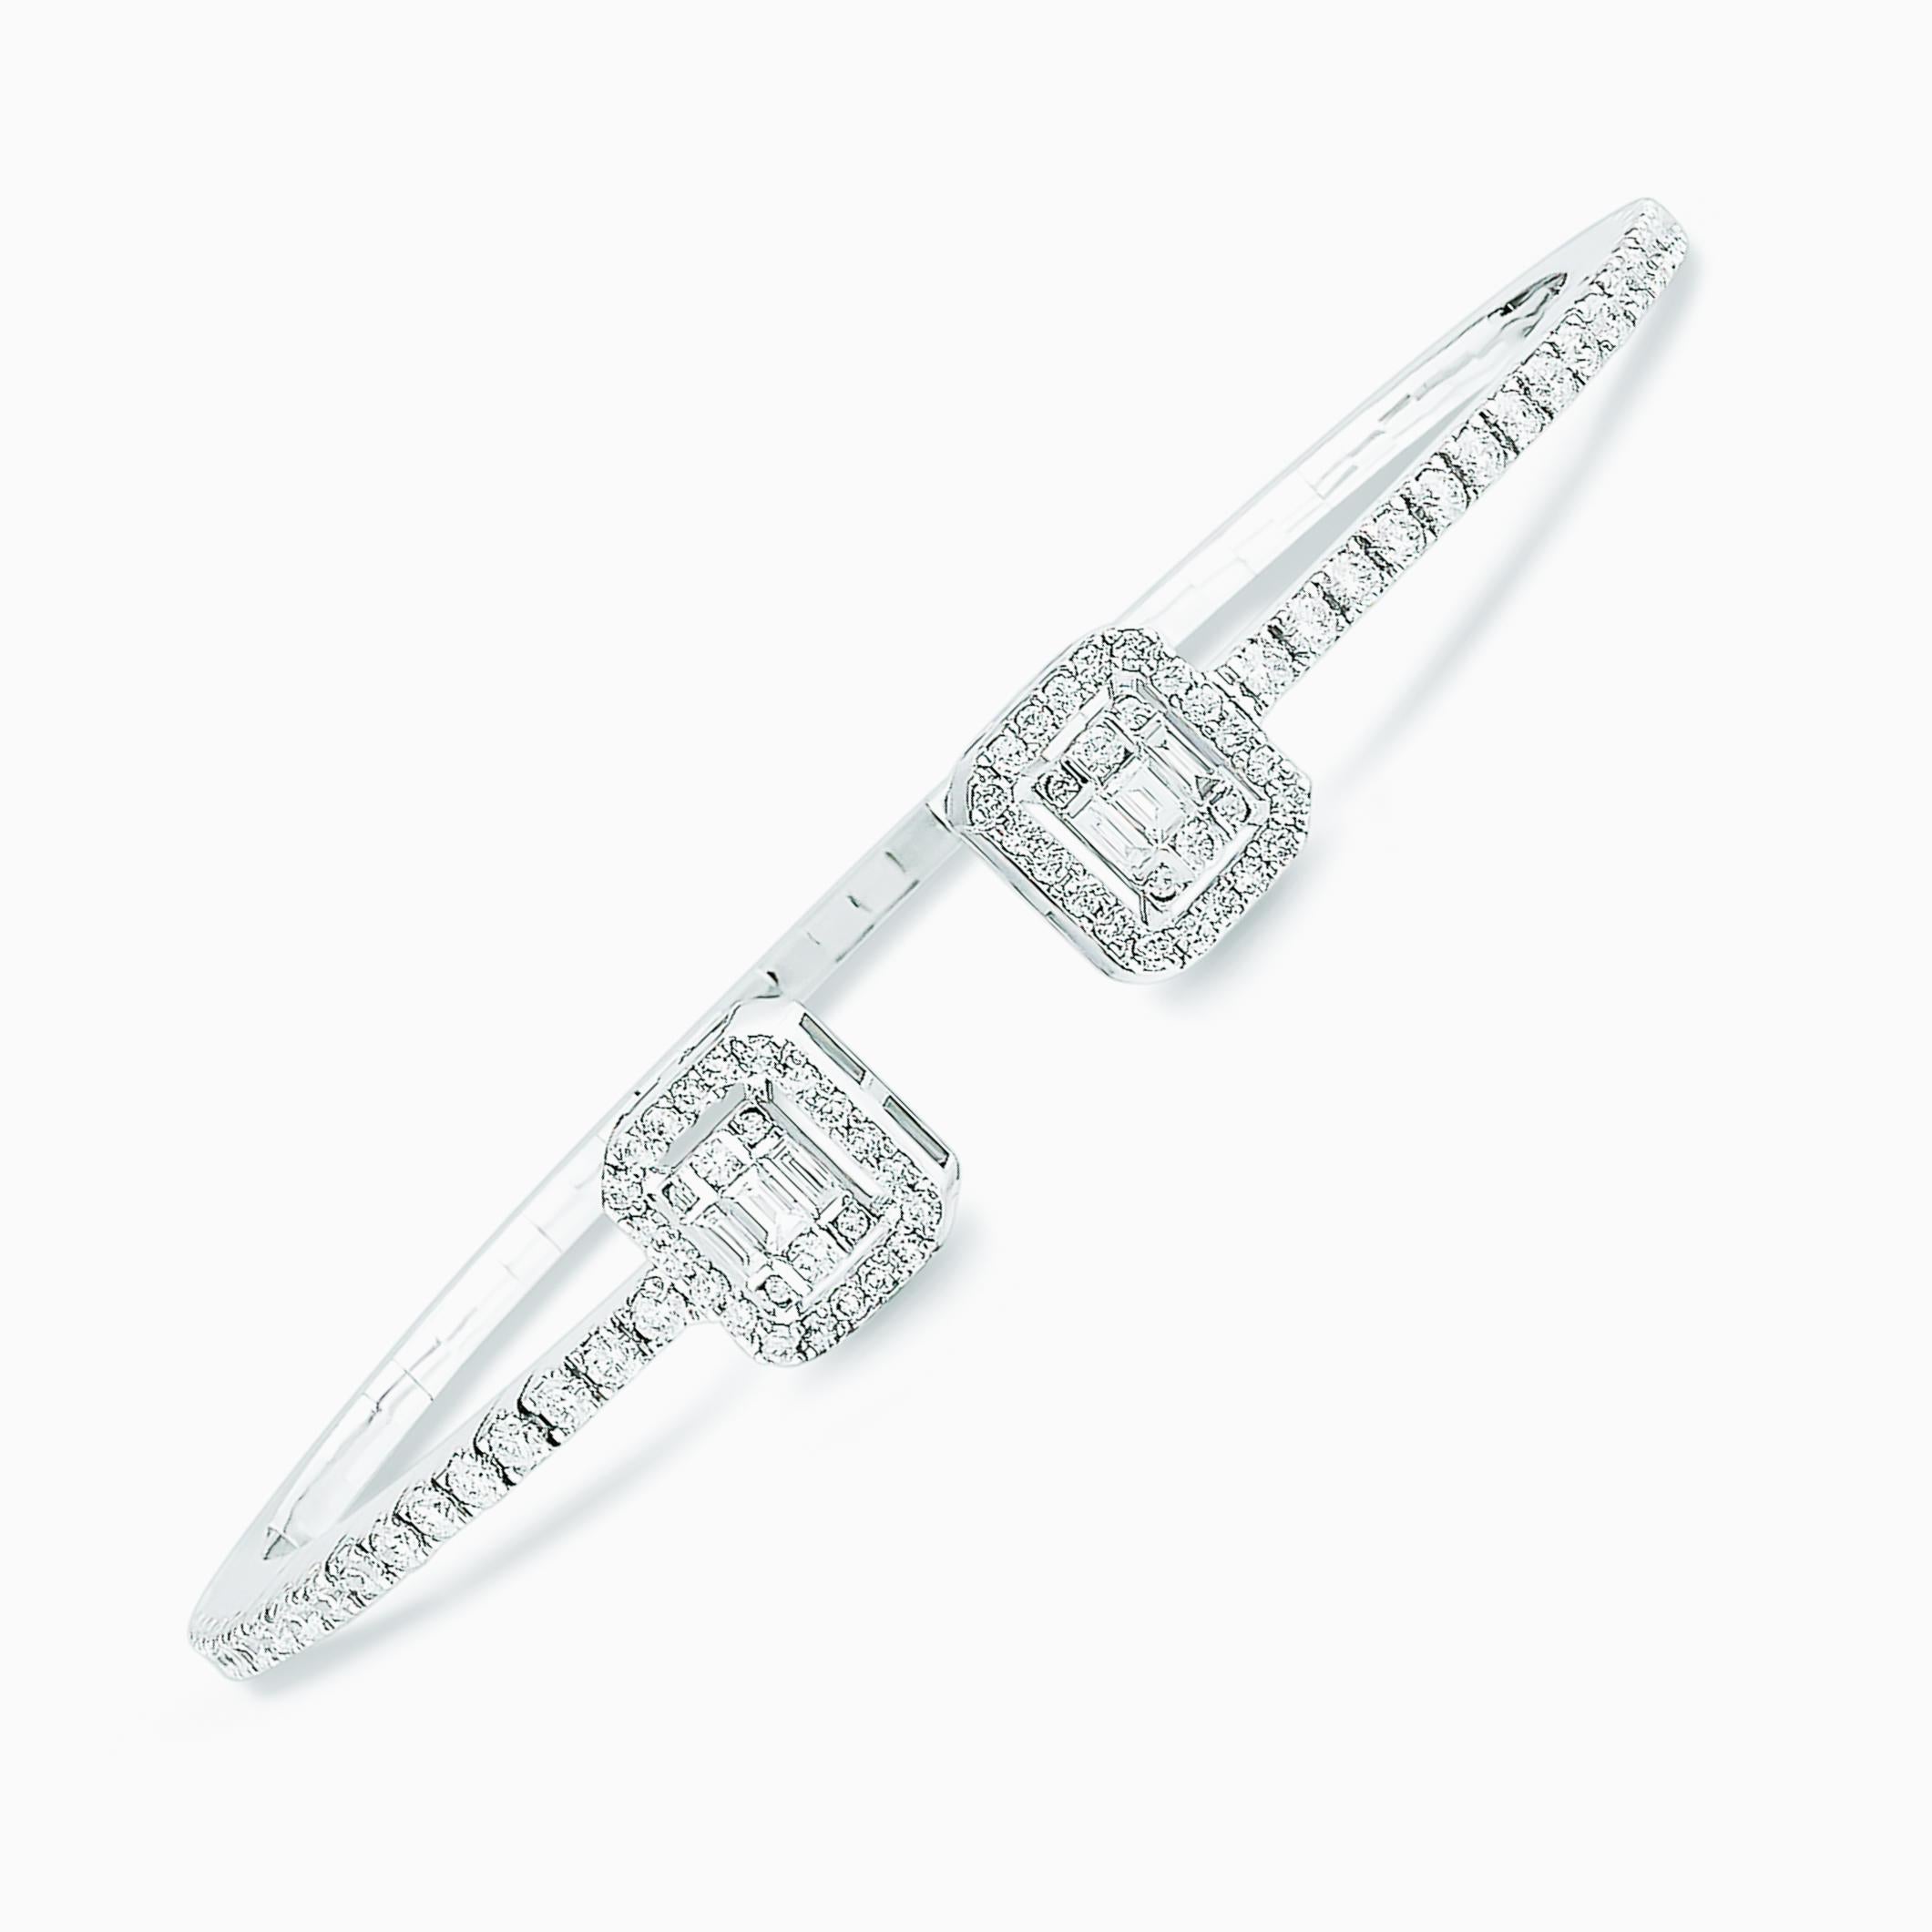 A fine and impressive 1.33-carat Emerald cut diamond bracelet set in 18K White Gold.
The diamond cuff bracelet is set with round diamonds weighing 1.11 carats and a set of baguette diamonds weighing 0.20 carats. 
The diamond color is F/G, and the